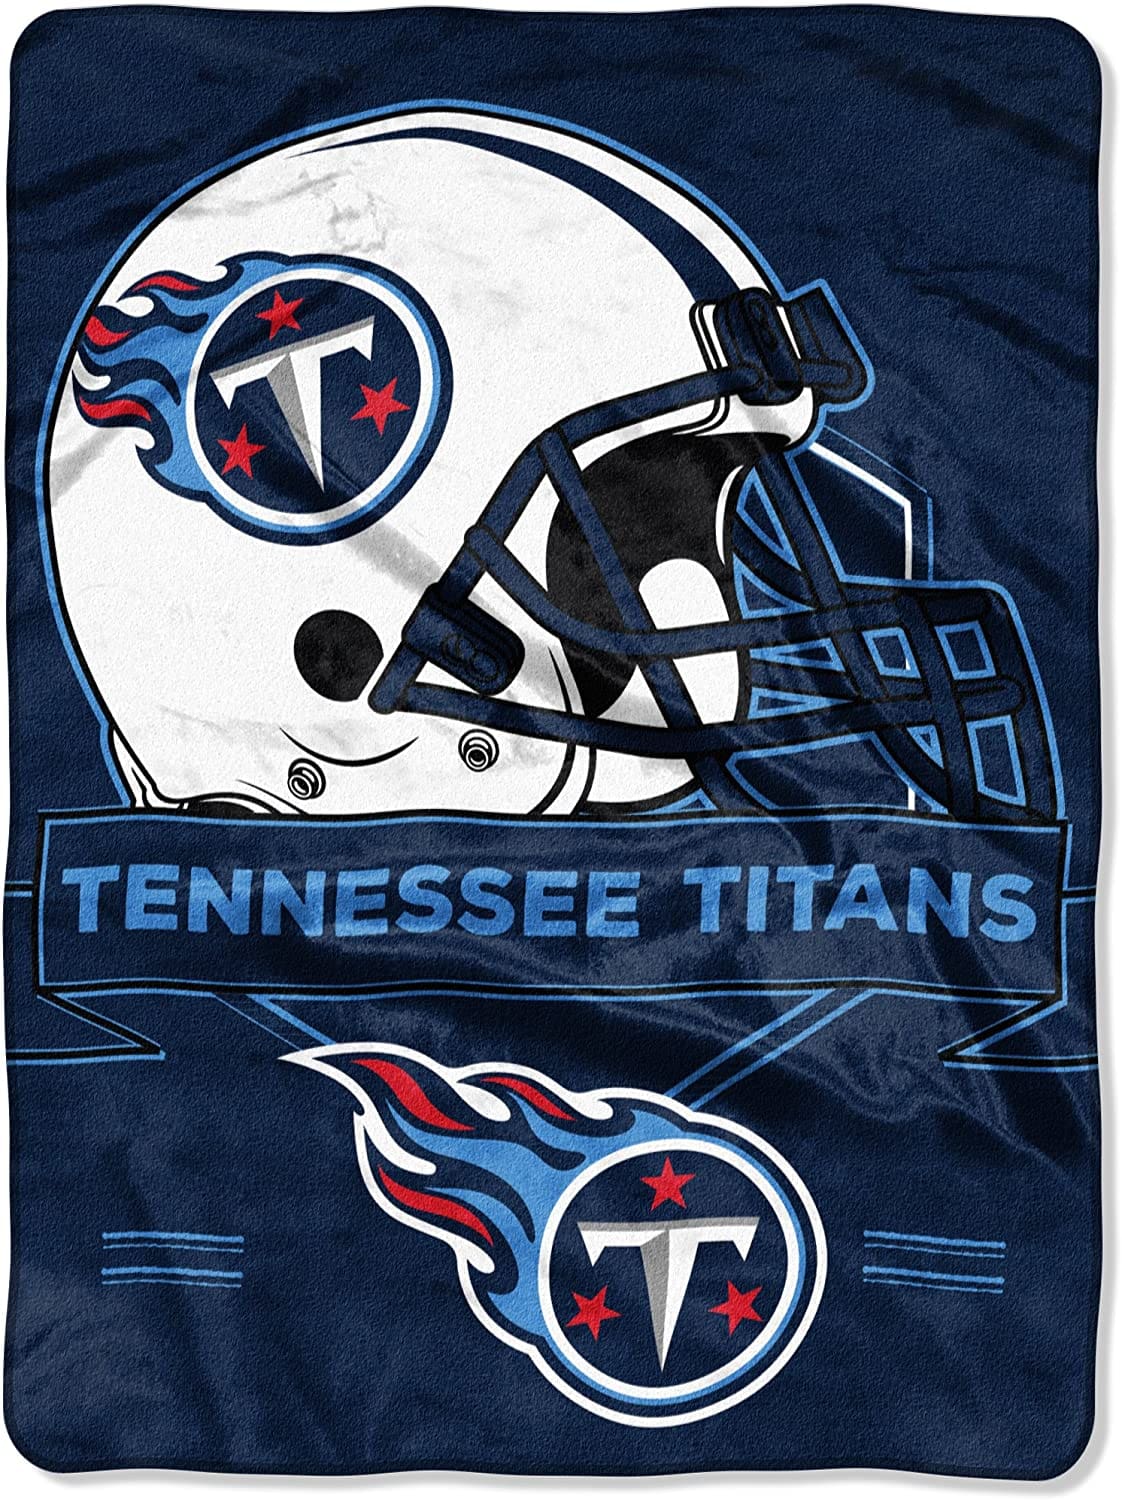 Officially Licensed Nfl Throw Tennessee Titans Fleece Blanket